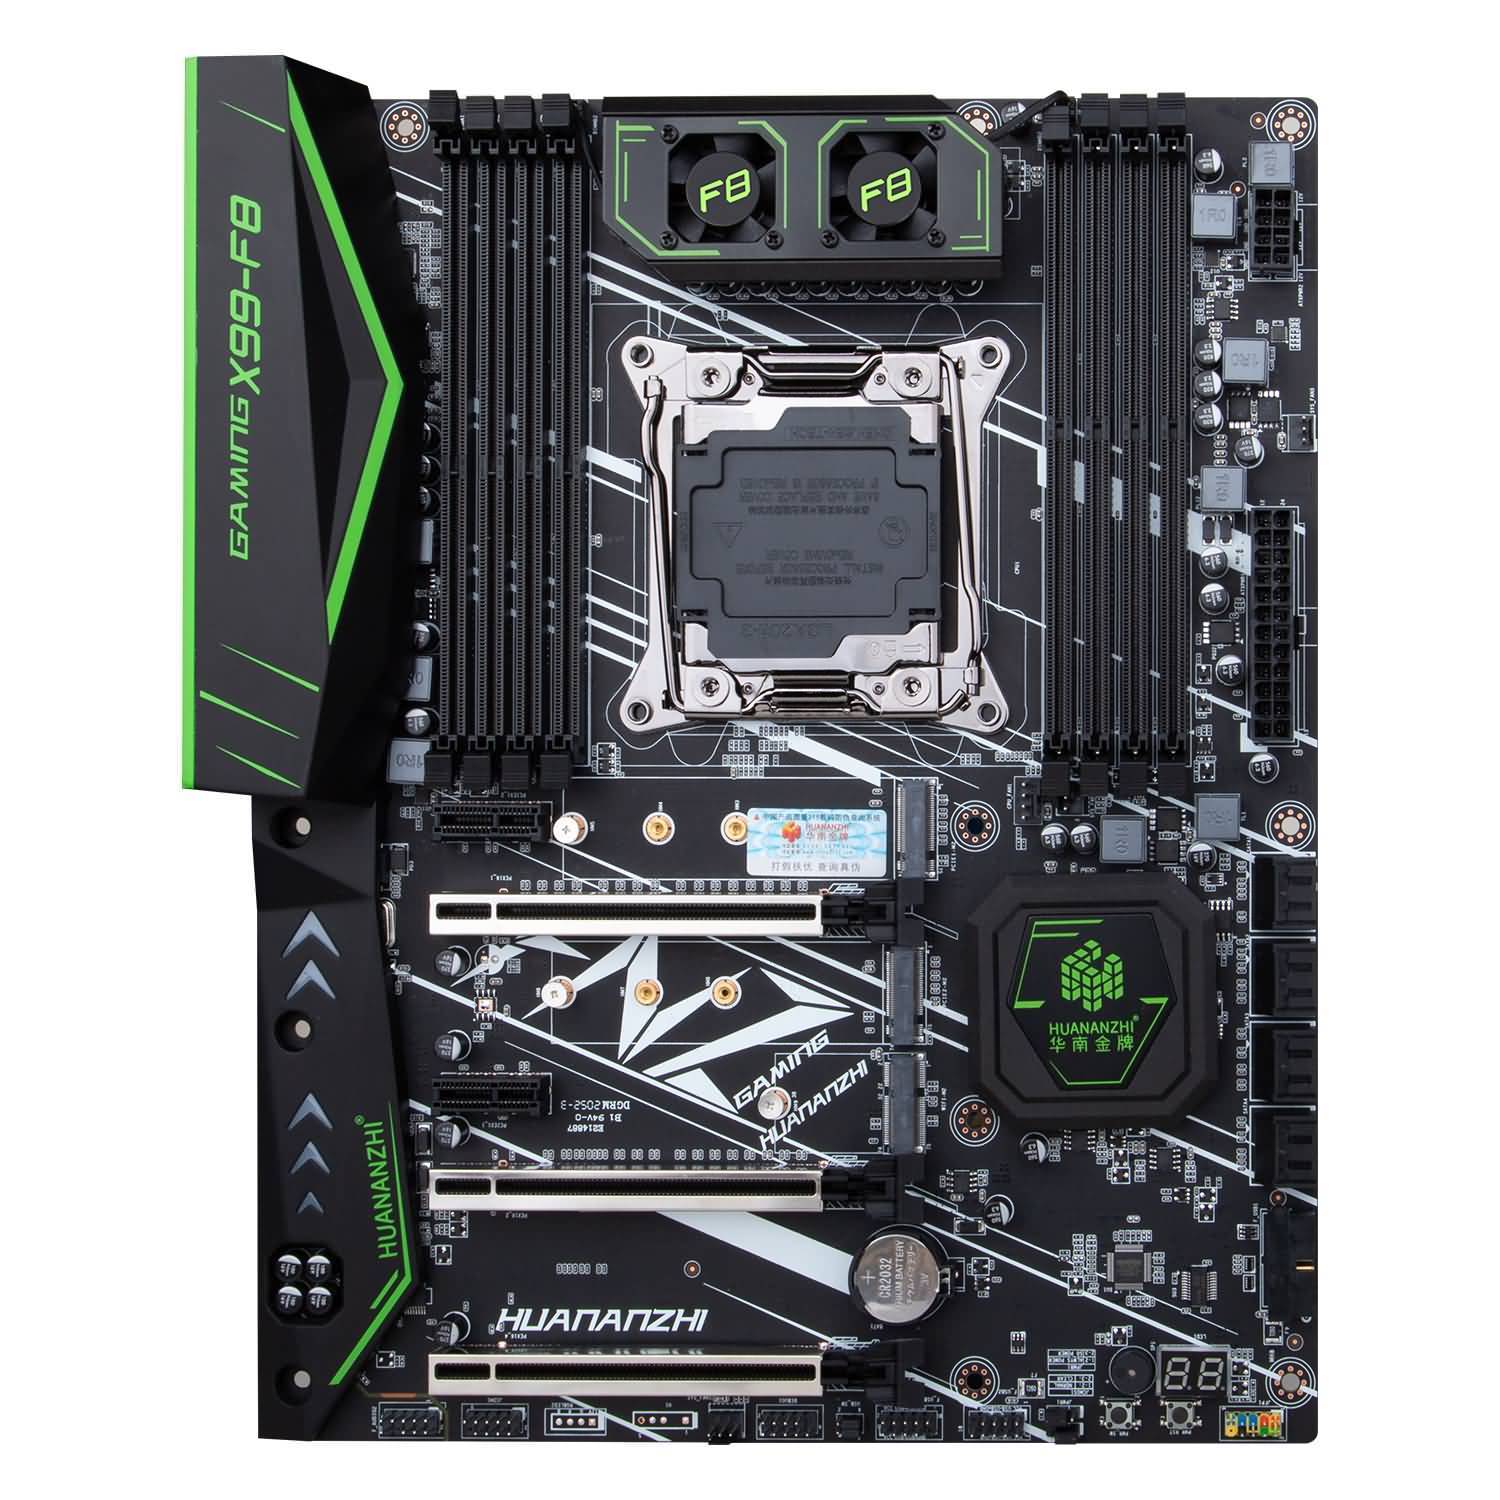 Download Huananzhi X99-F8 Motherboard Free